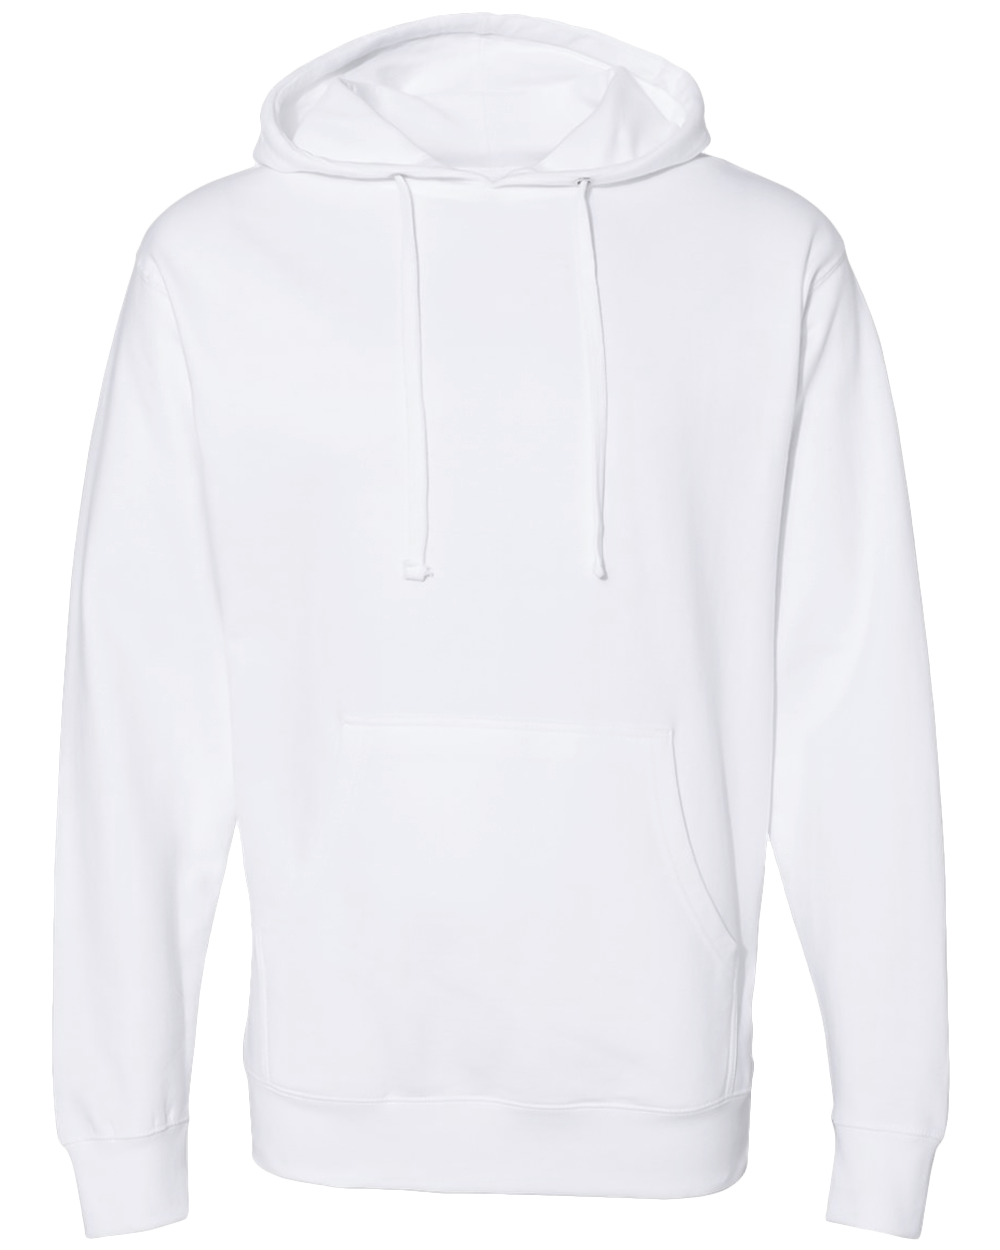 SS4500 Midweight Hooded Sweatshirt - Independent Trading Co. - CustomCat